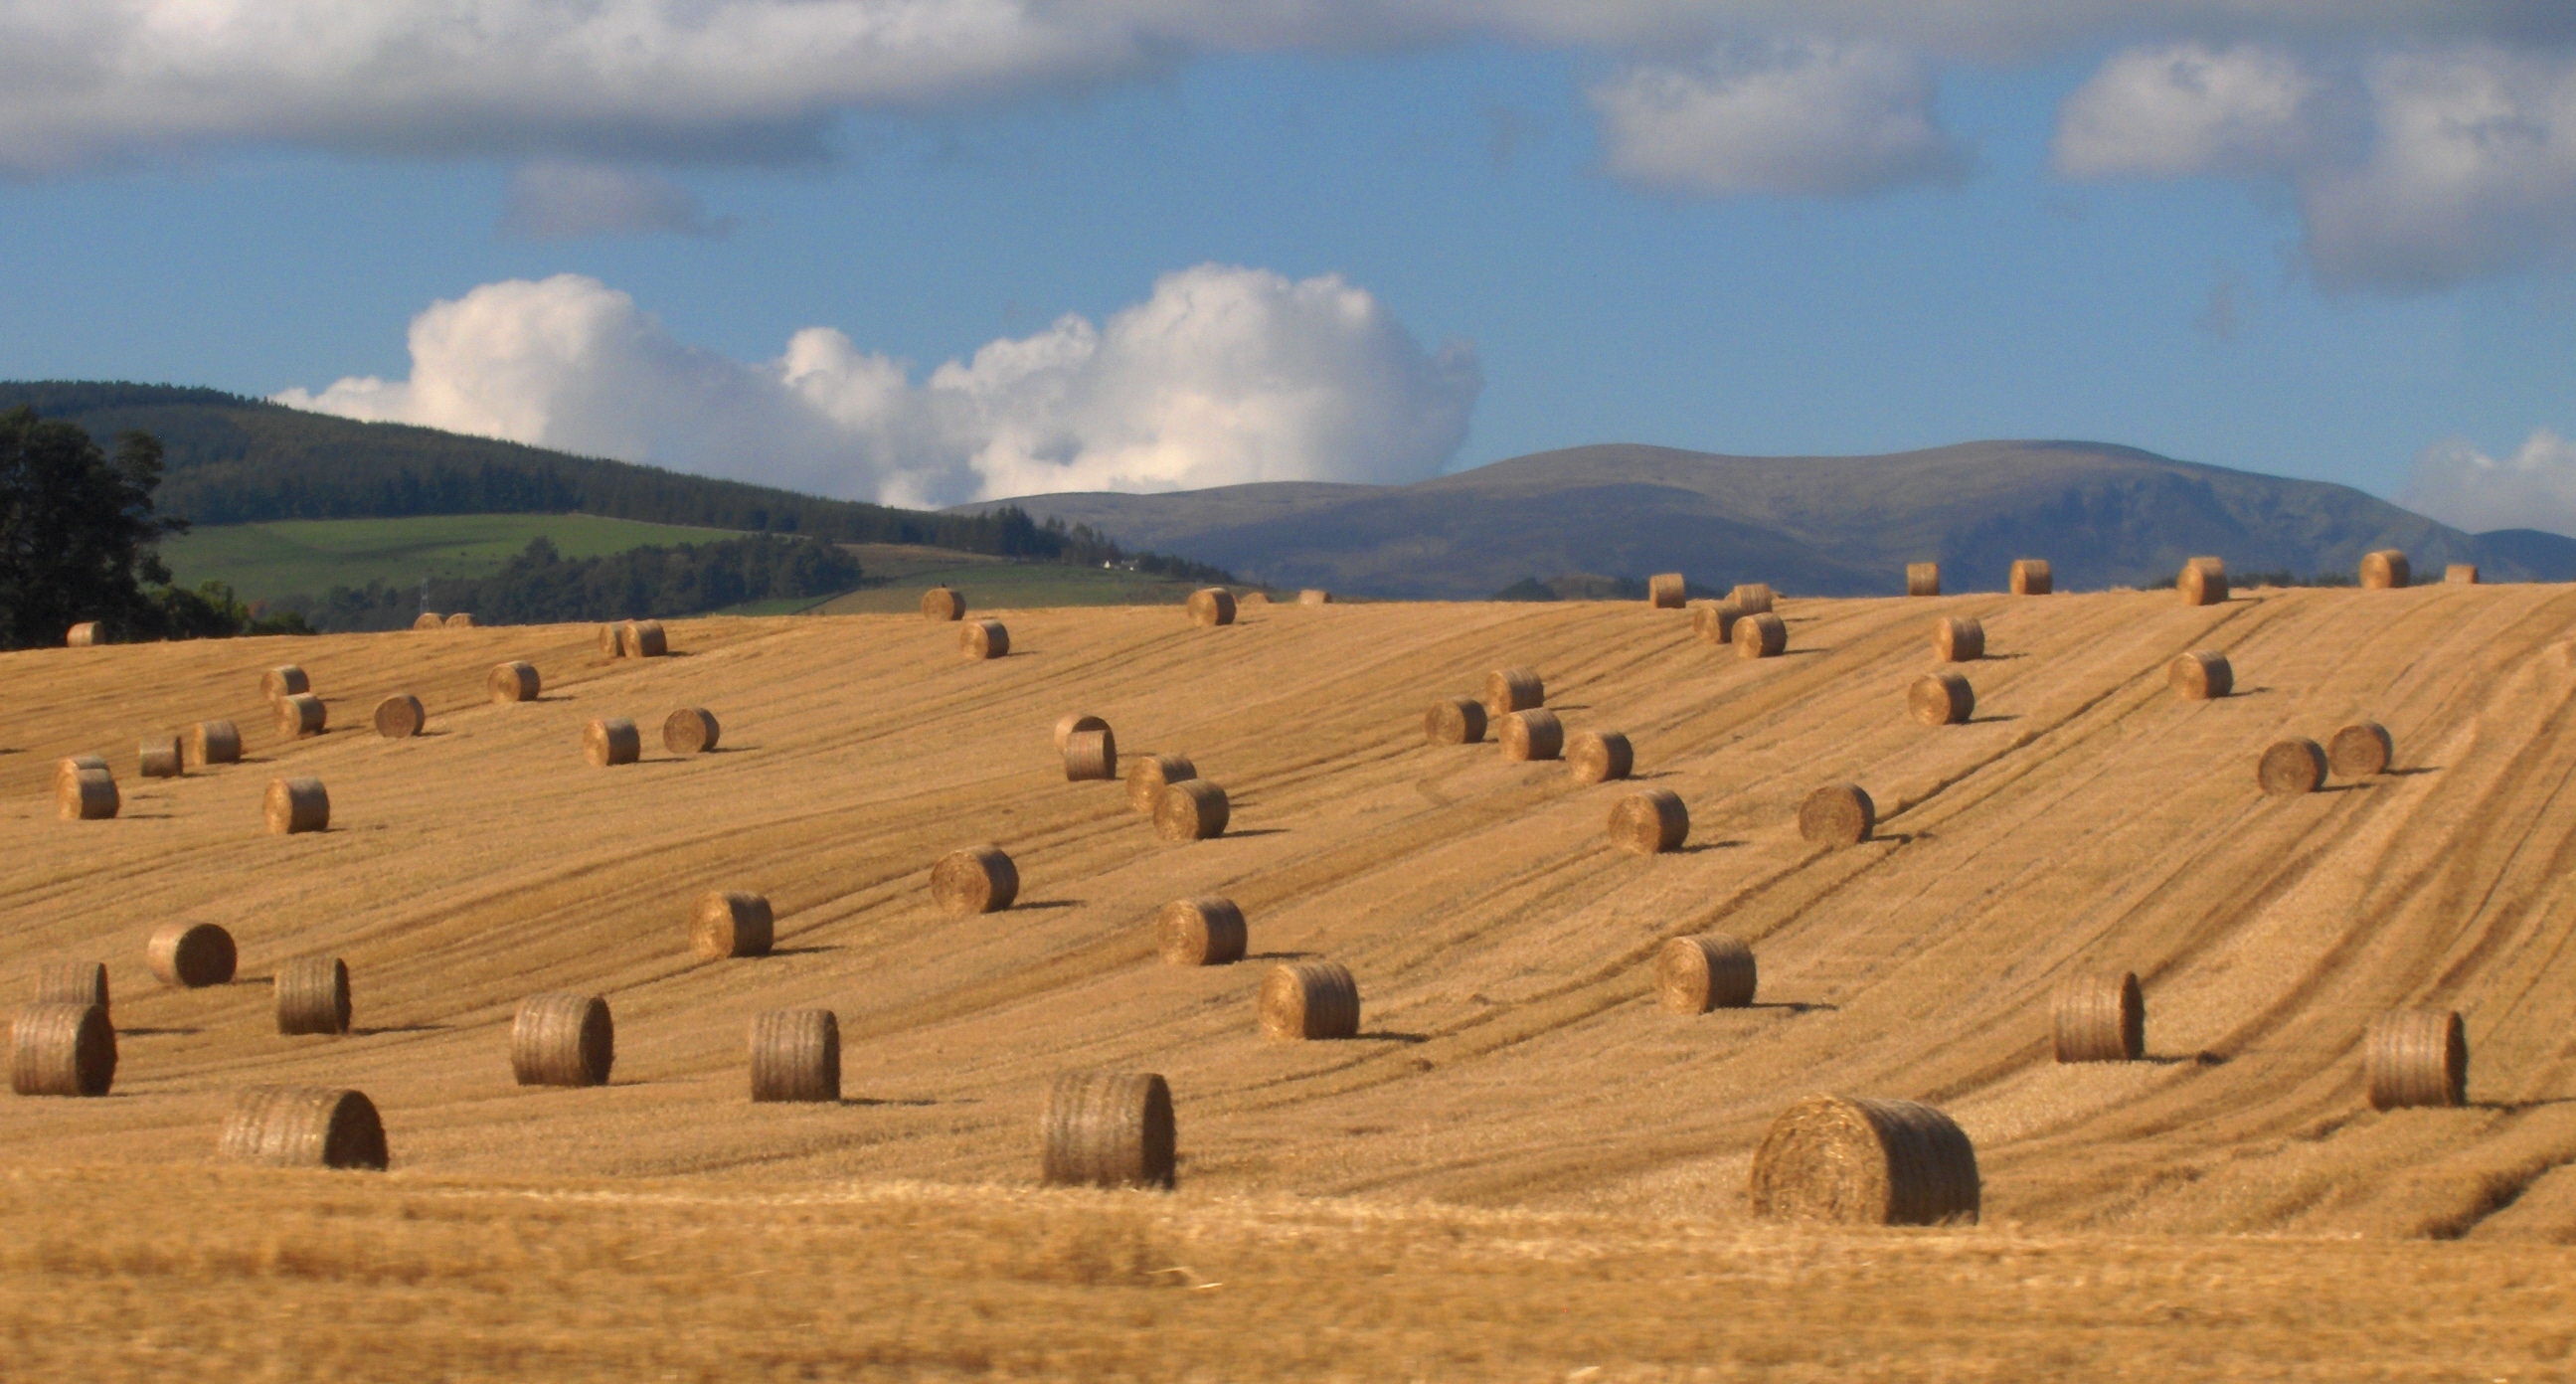 File:Round straw bales in a field.jpg - Wikimedia Commons